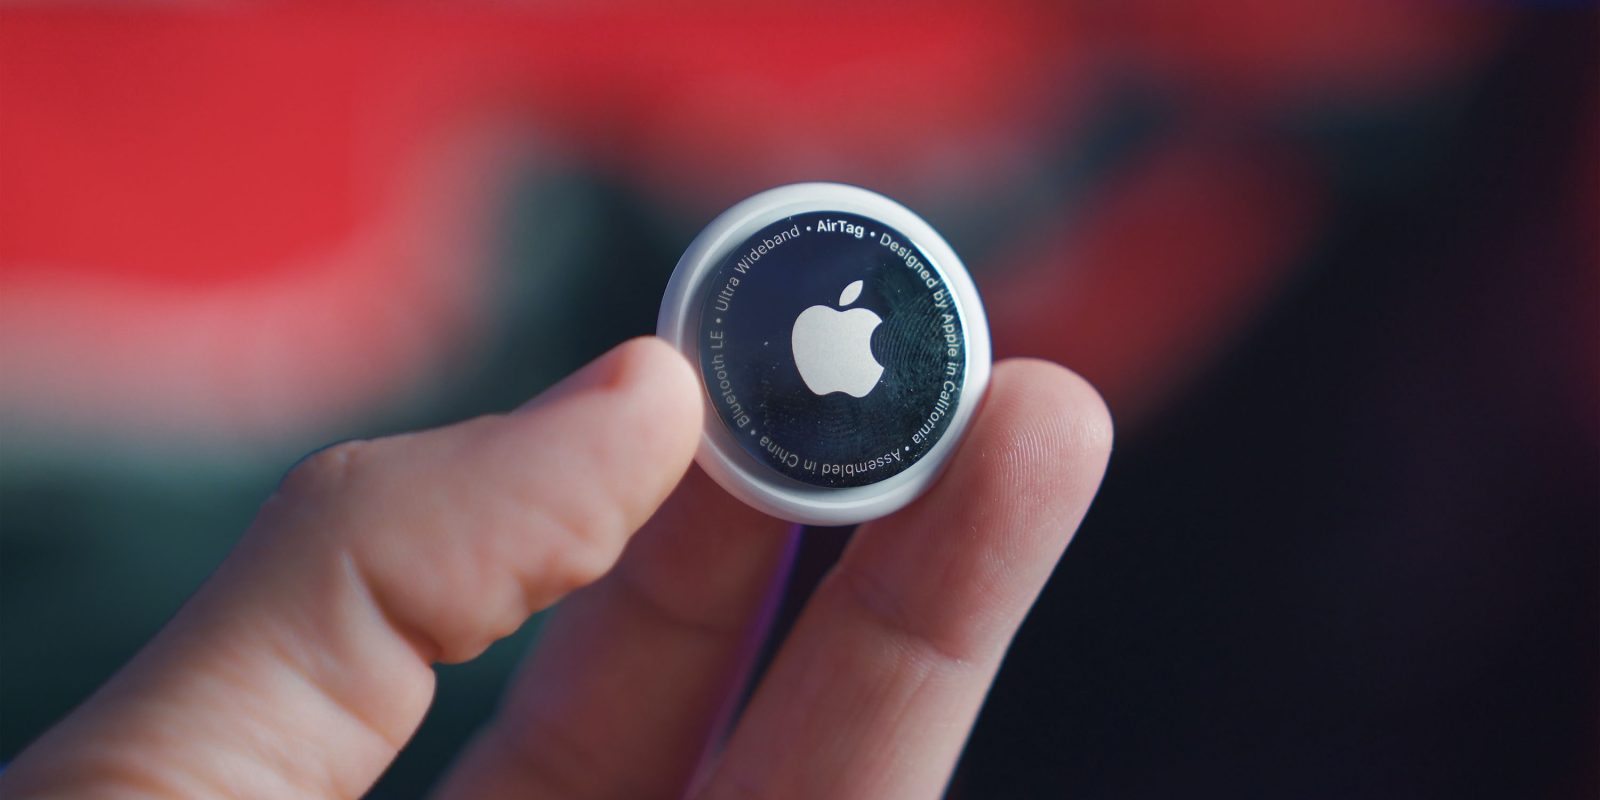 Apple releases a new firmware update for the AirTag item tracker